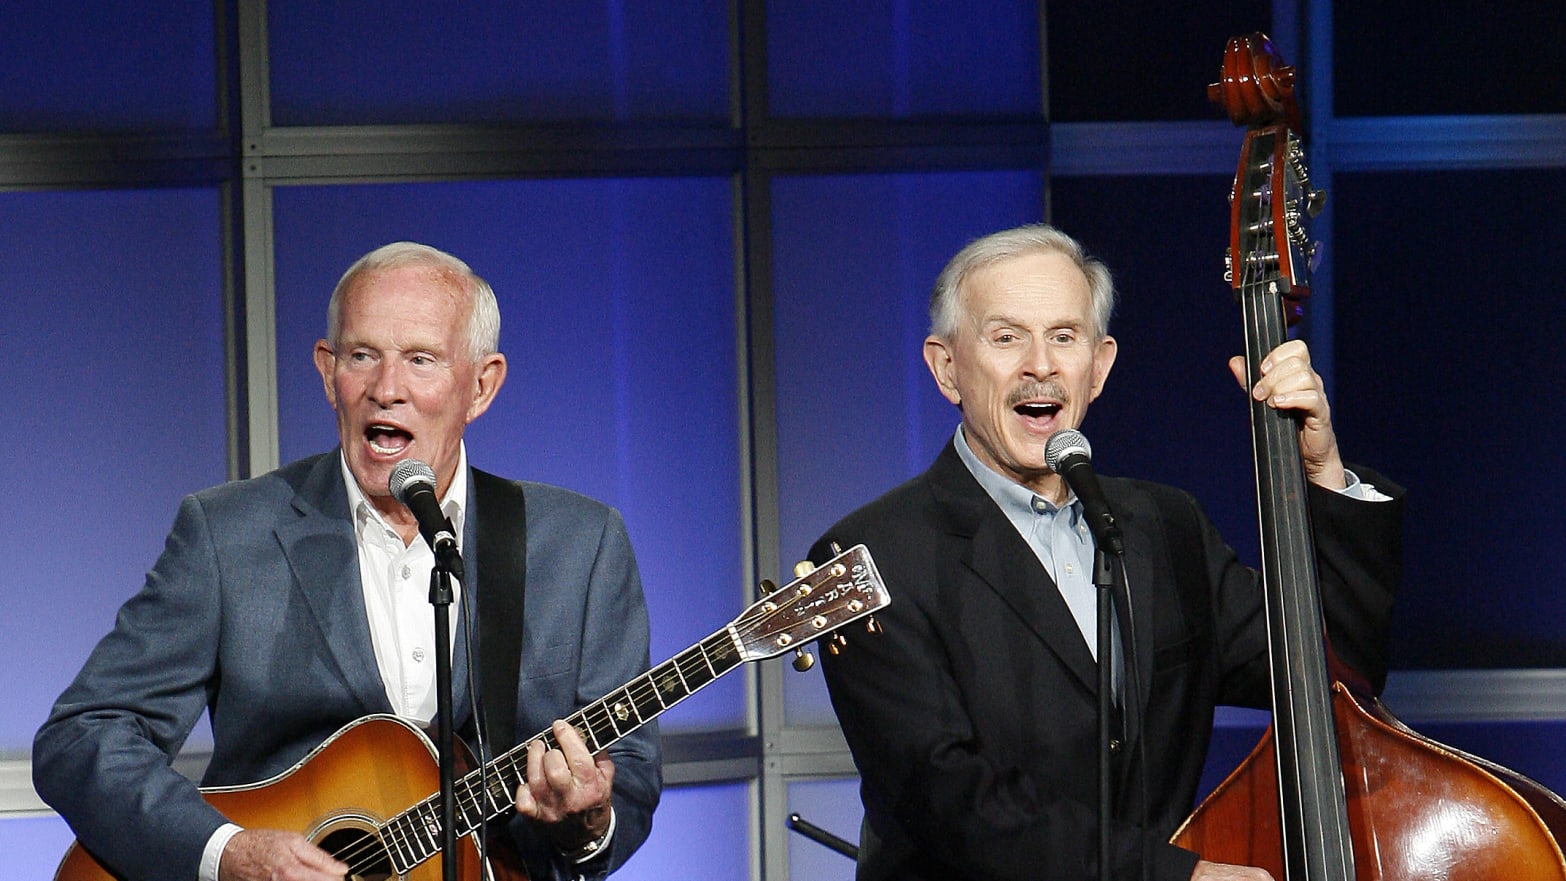 Tom Smothers (L) and Dick Smothers perform at the 24th Annual Television Critics Association Awards in Beverly Hills July 19, 2008